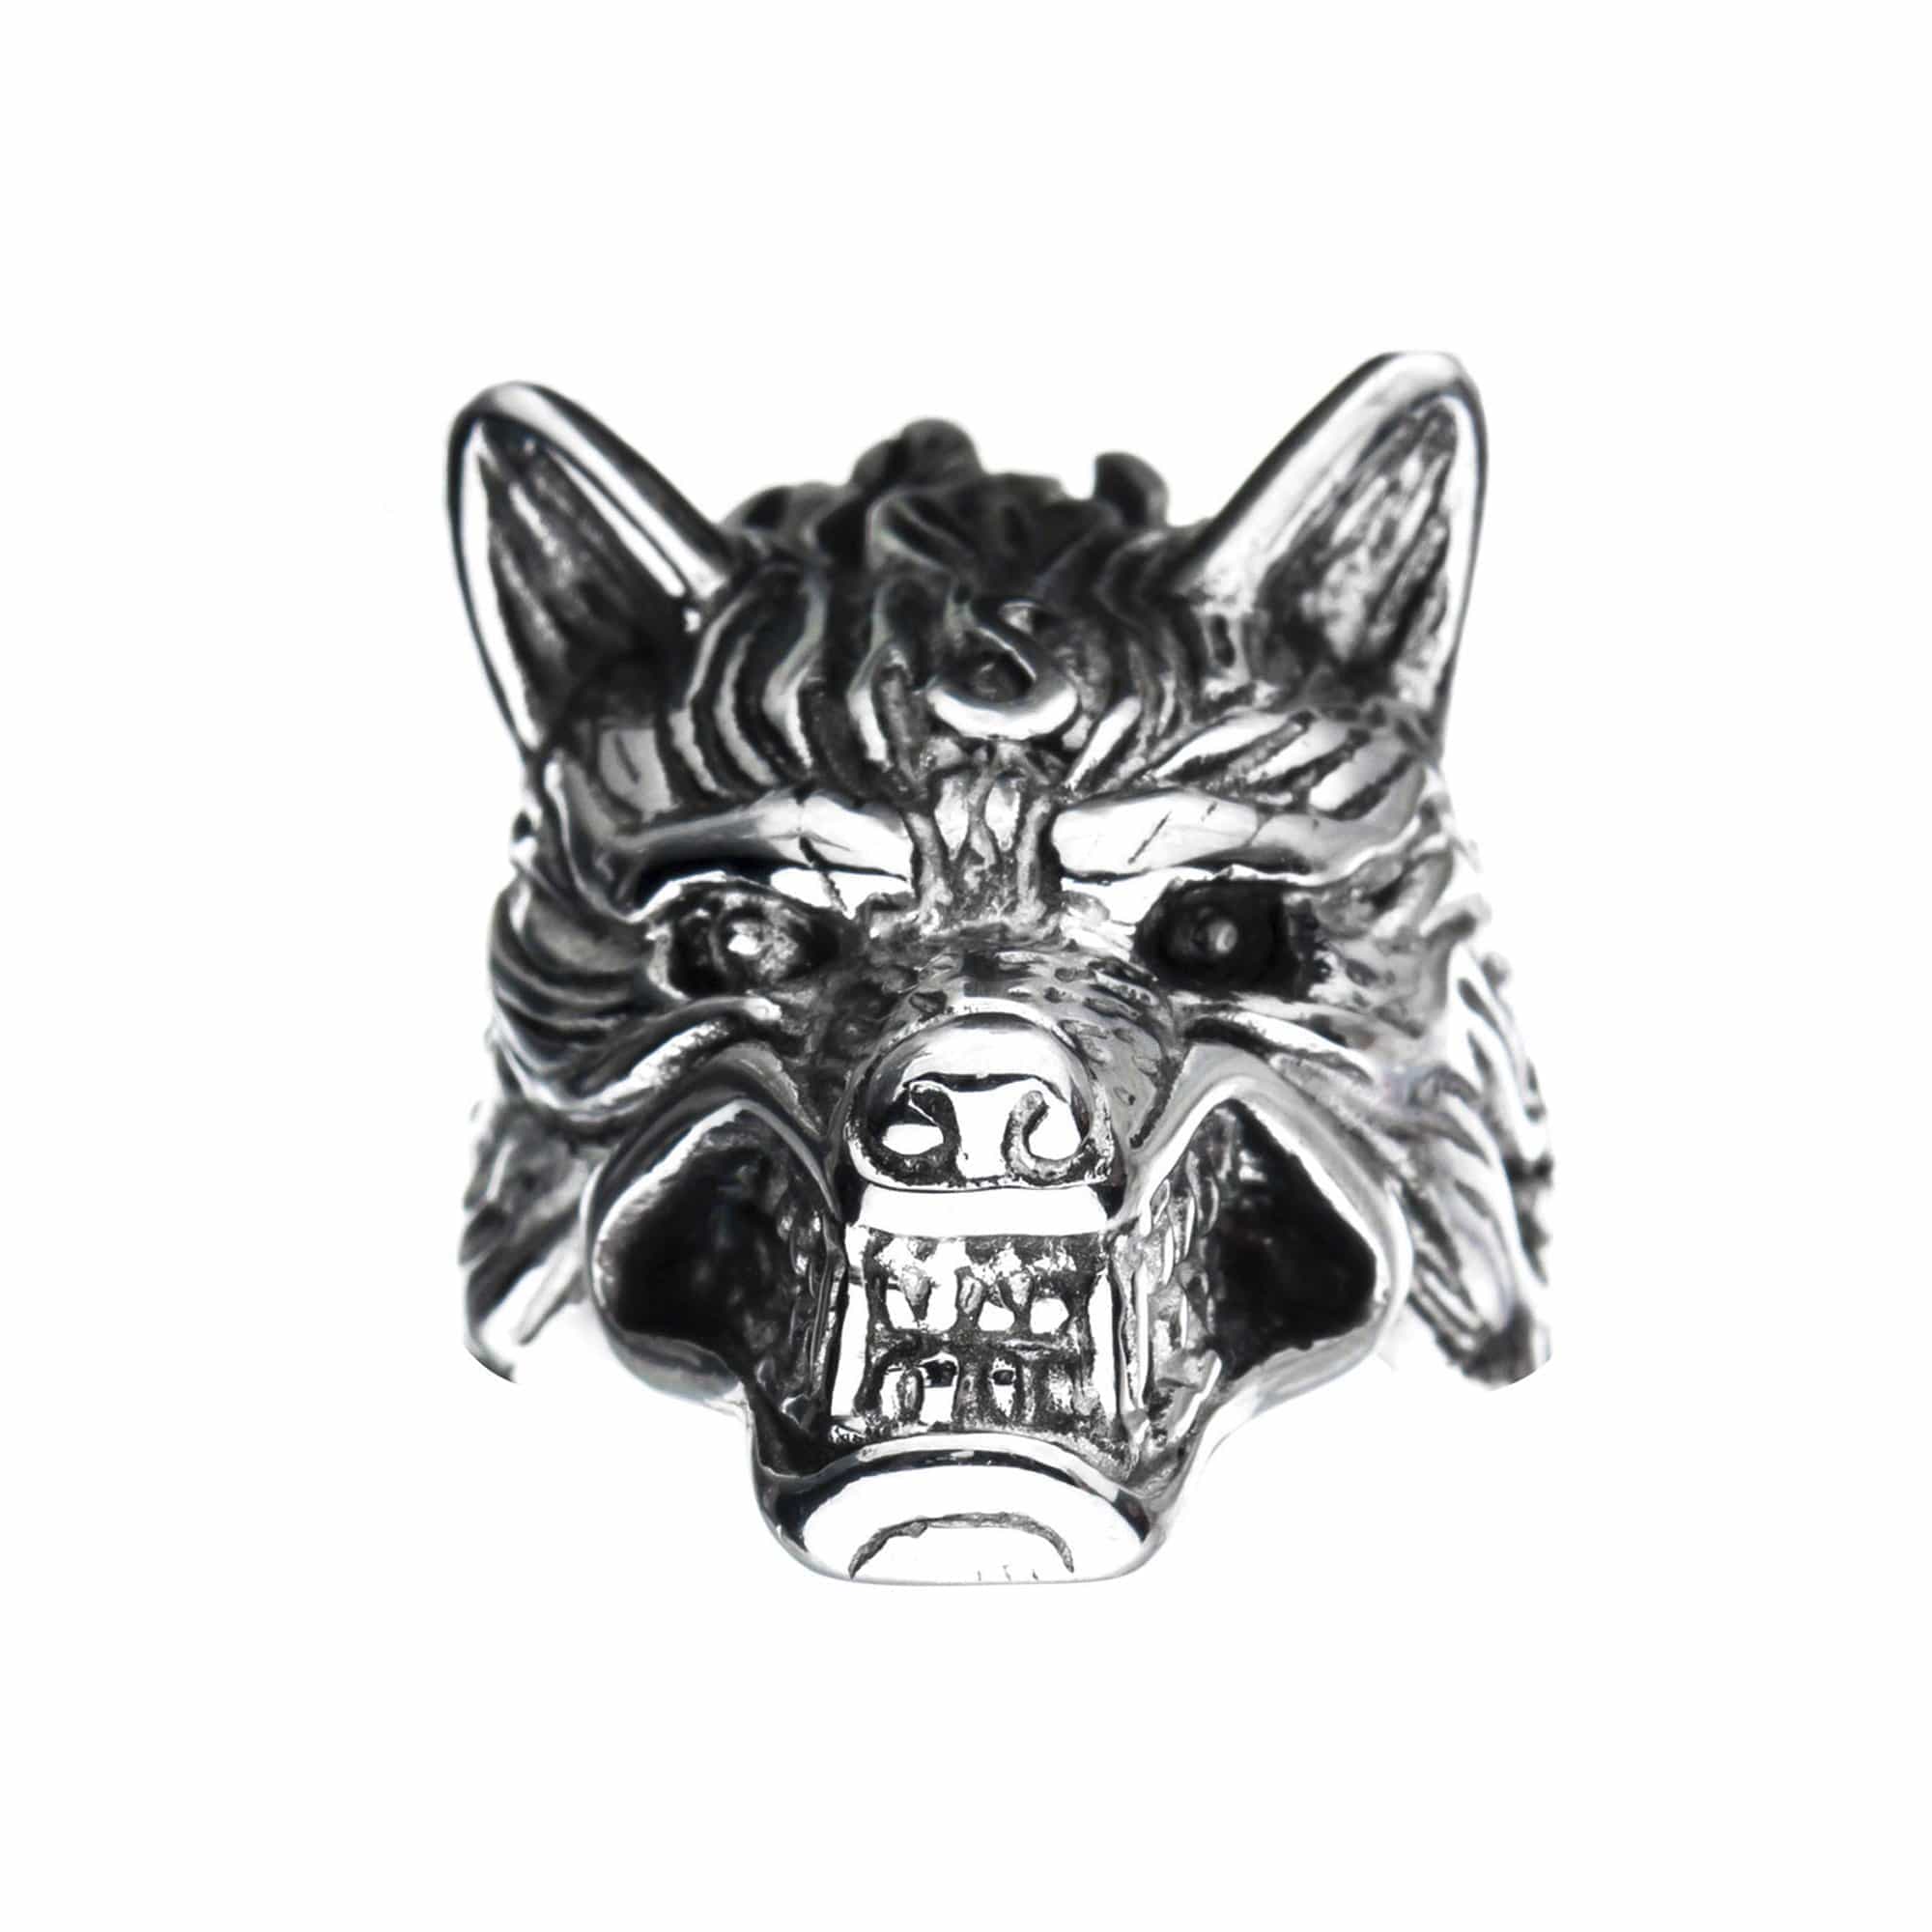 INOX JEWELRY Rings Silver Tone Stainless Steel Angry Wolf Ring